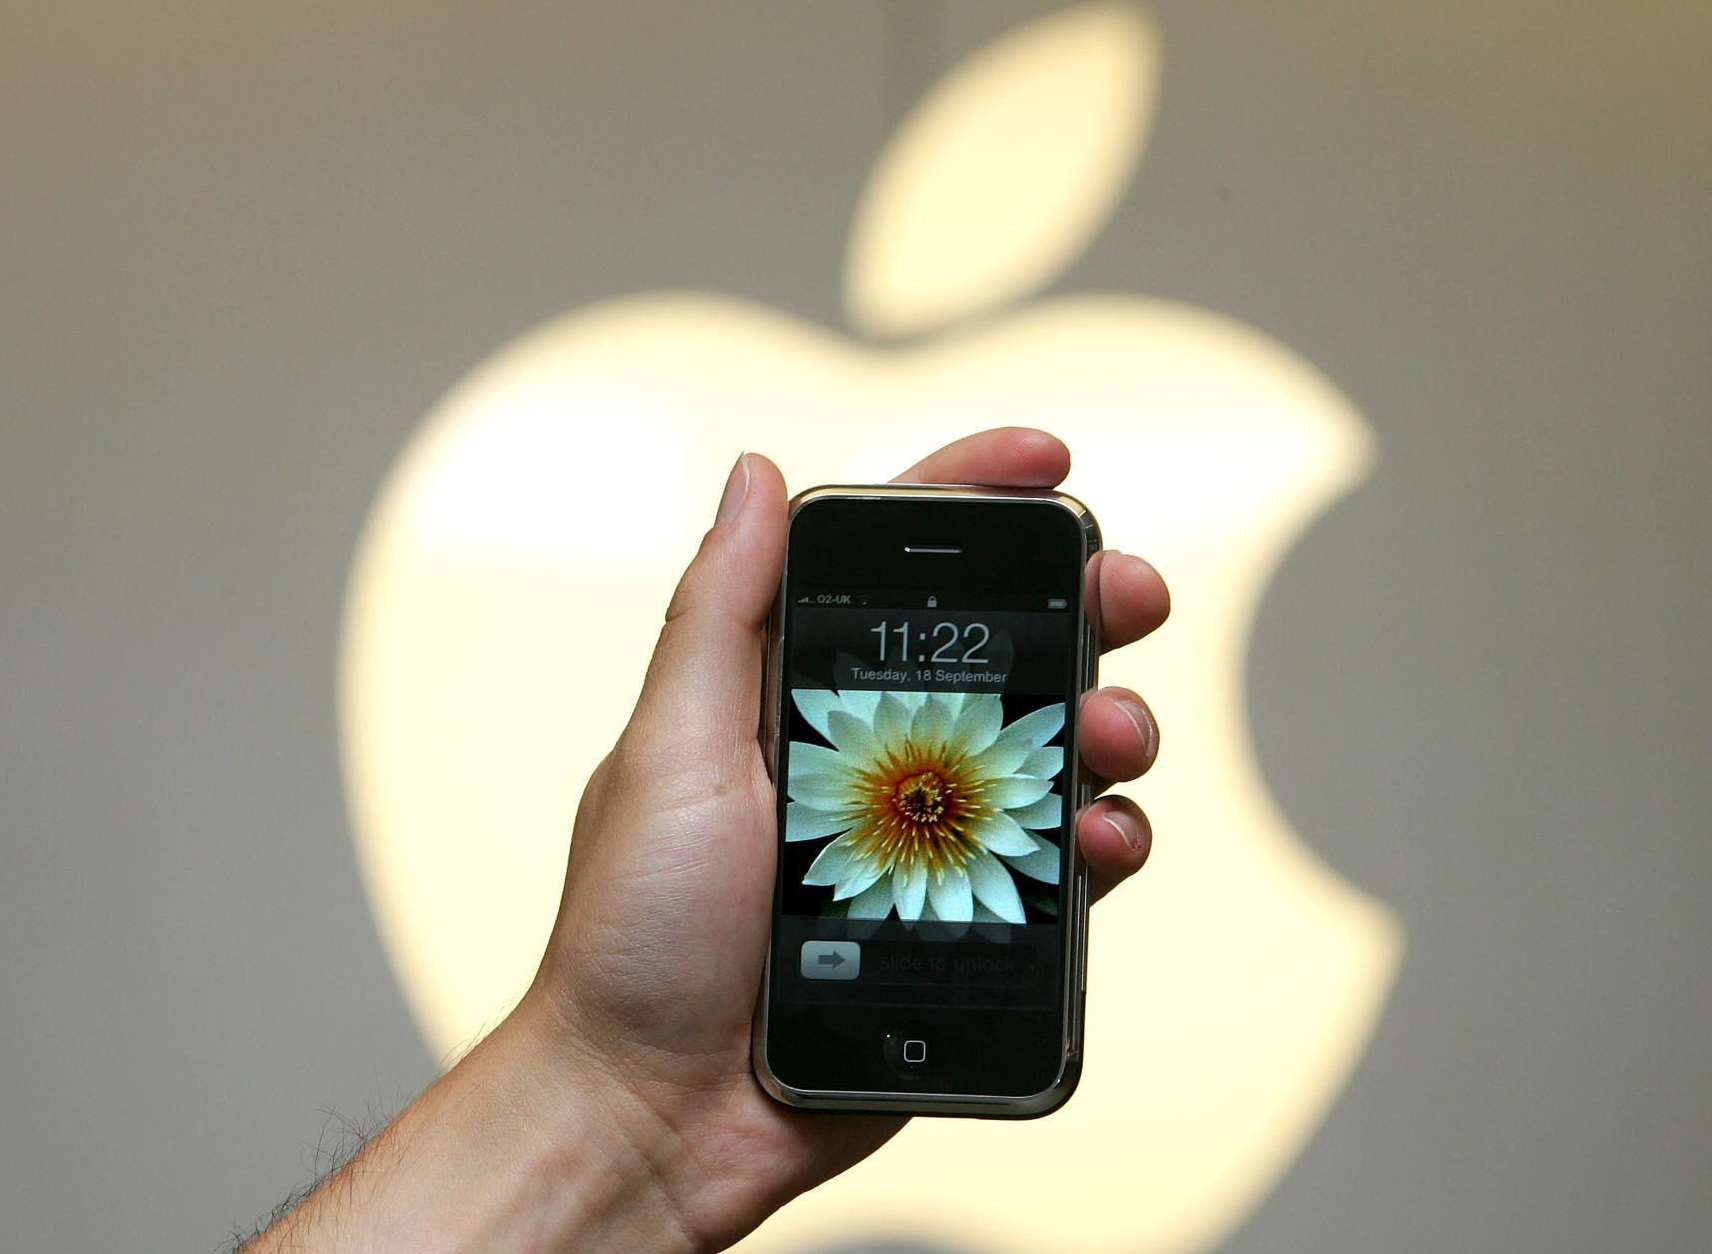 The iPhone was launched 10 years ago